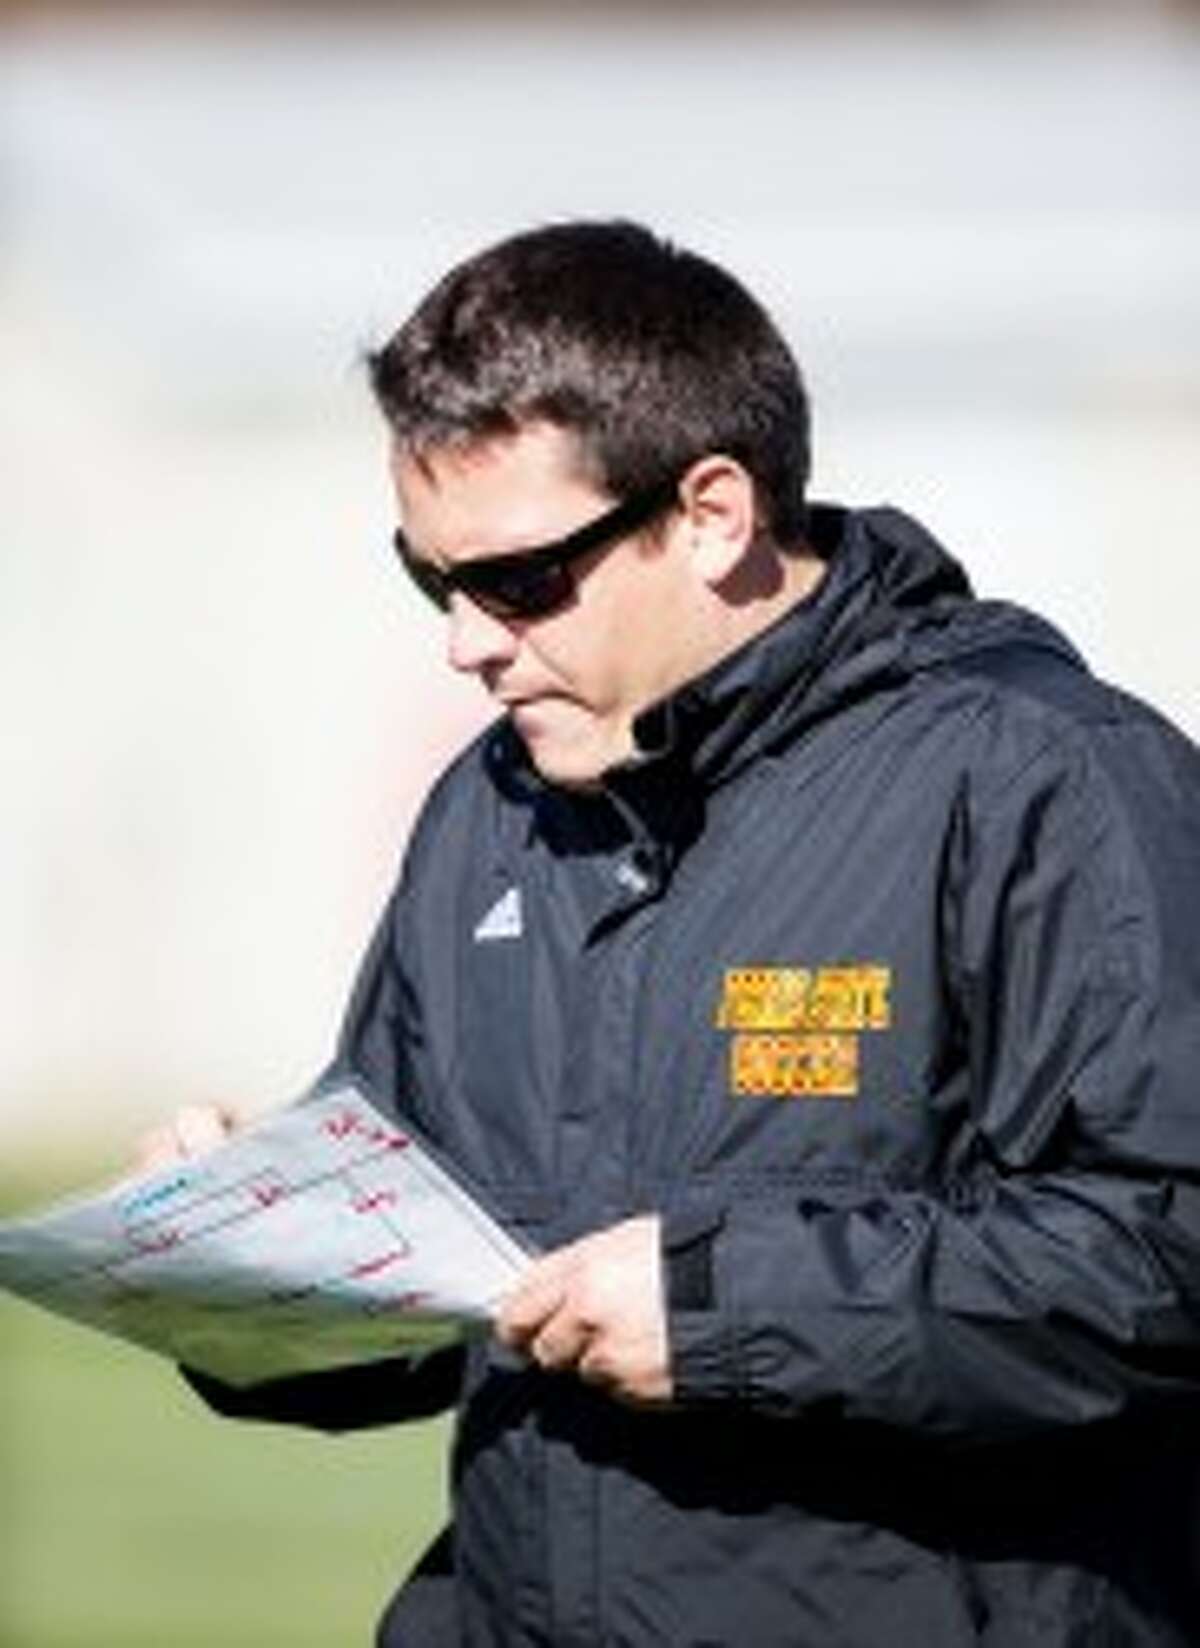 AT WORK: Andy McCaslin takes over as women’s soccer coach at FSU after serving as an assistant last season. (Courtesy photo)